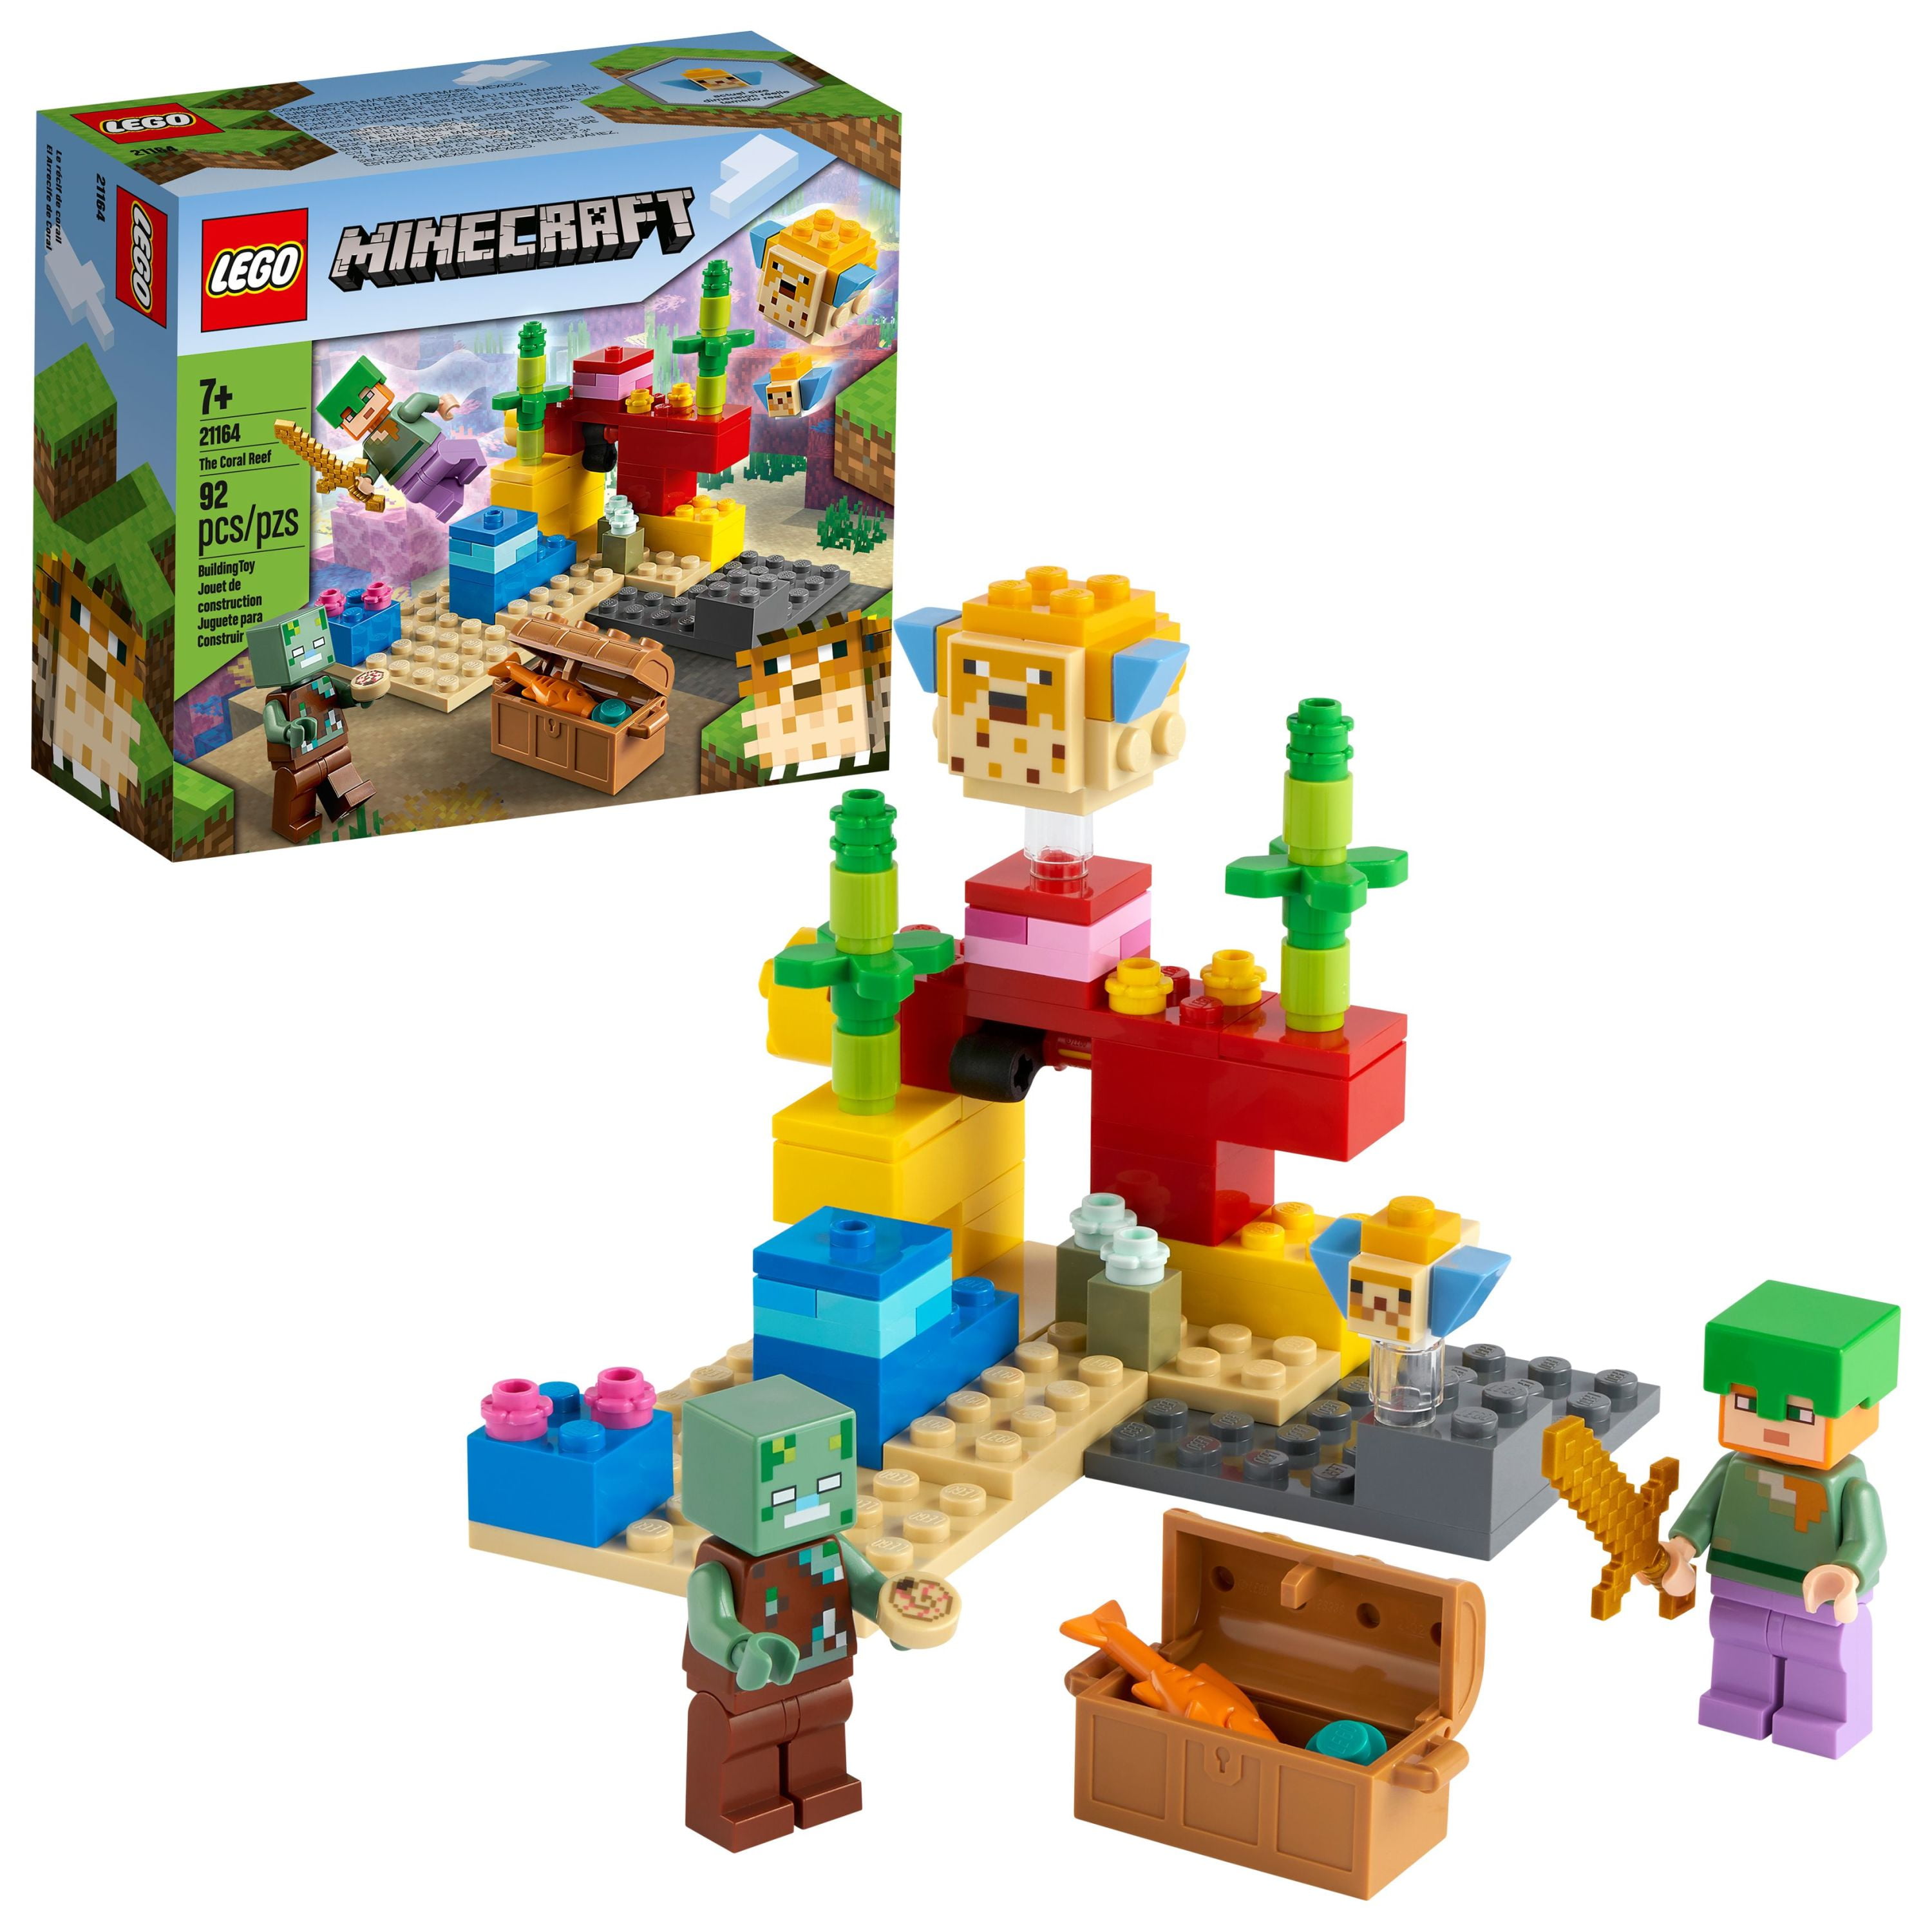 LEGO Minecraft The Coral Reef 21164 Building Toy with Alex, 2 Brick-Built Puffer Fish Animal Figures and Drowned Zombie Figure, Gifts for Kids, Boys & Girls Walmart.com